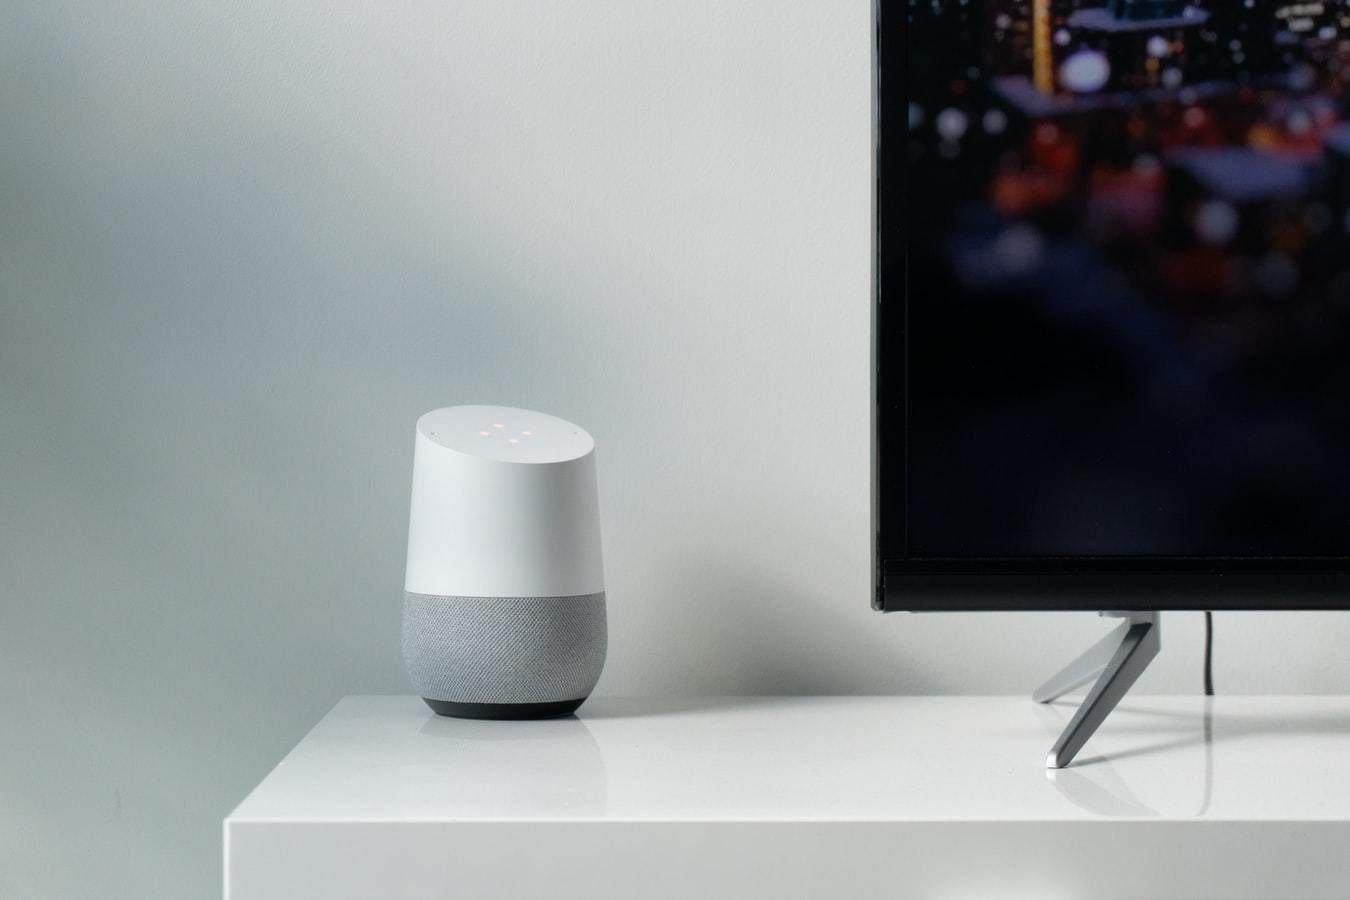 Why Does Google Home Randomly Talk And Sing By Itself